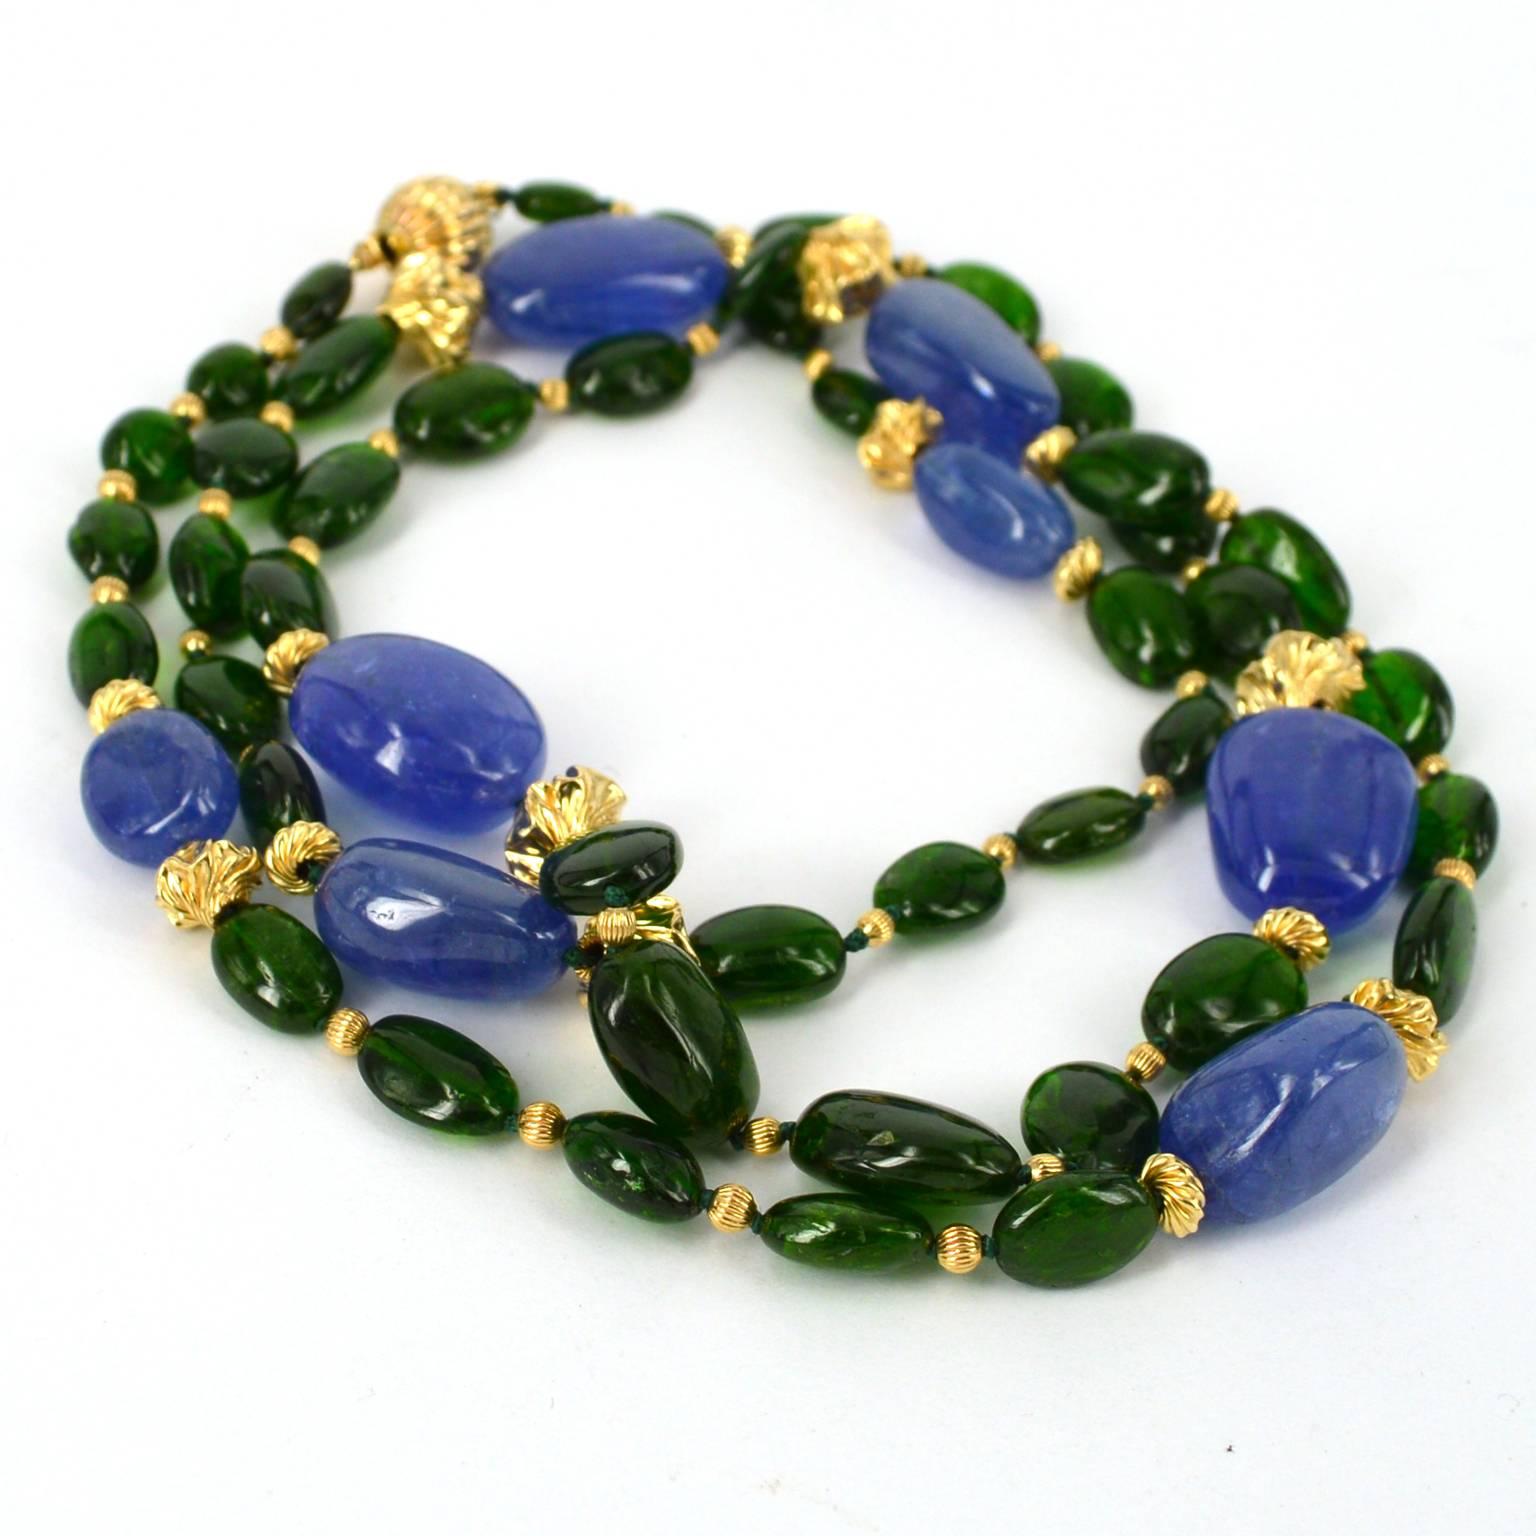 Vibrant  emerald green Chrome Diopside polished nuggets graduated 8-15mm with 8 polished Tanzanite nuggets 14-19mm hand knotted on Emerald colour thread. Necklace is spaced with 2mm congregated, 6mm Twist rondels and 8x7mm Twisted bead, finished